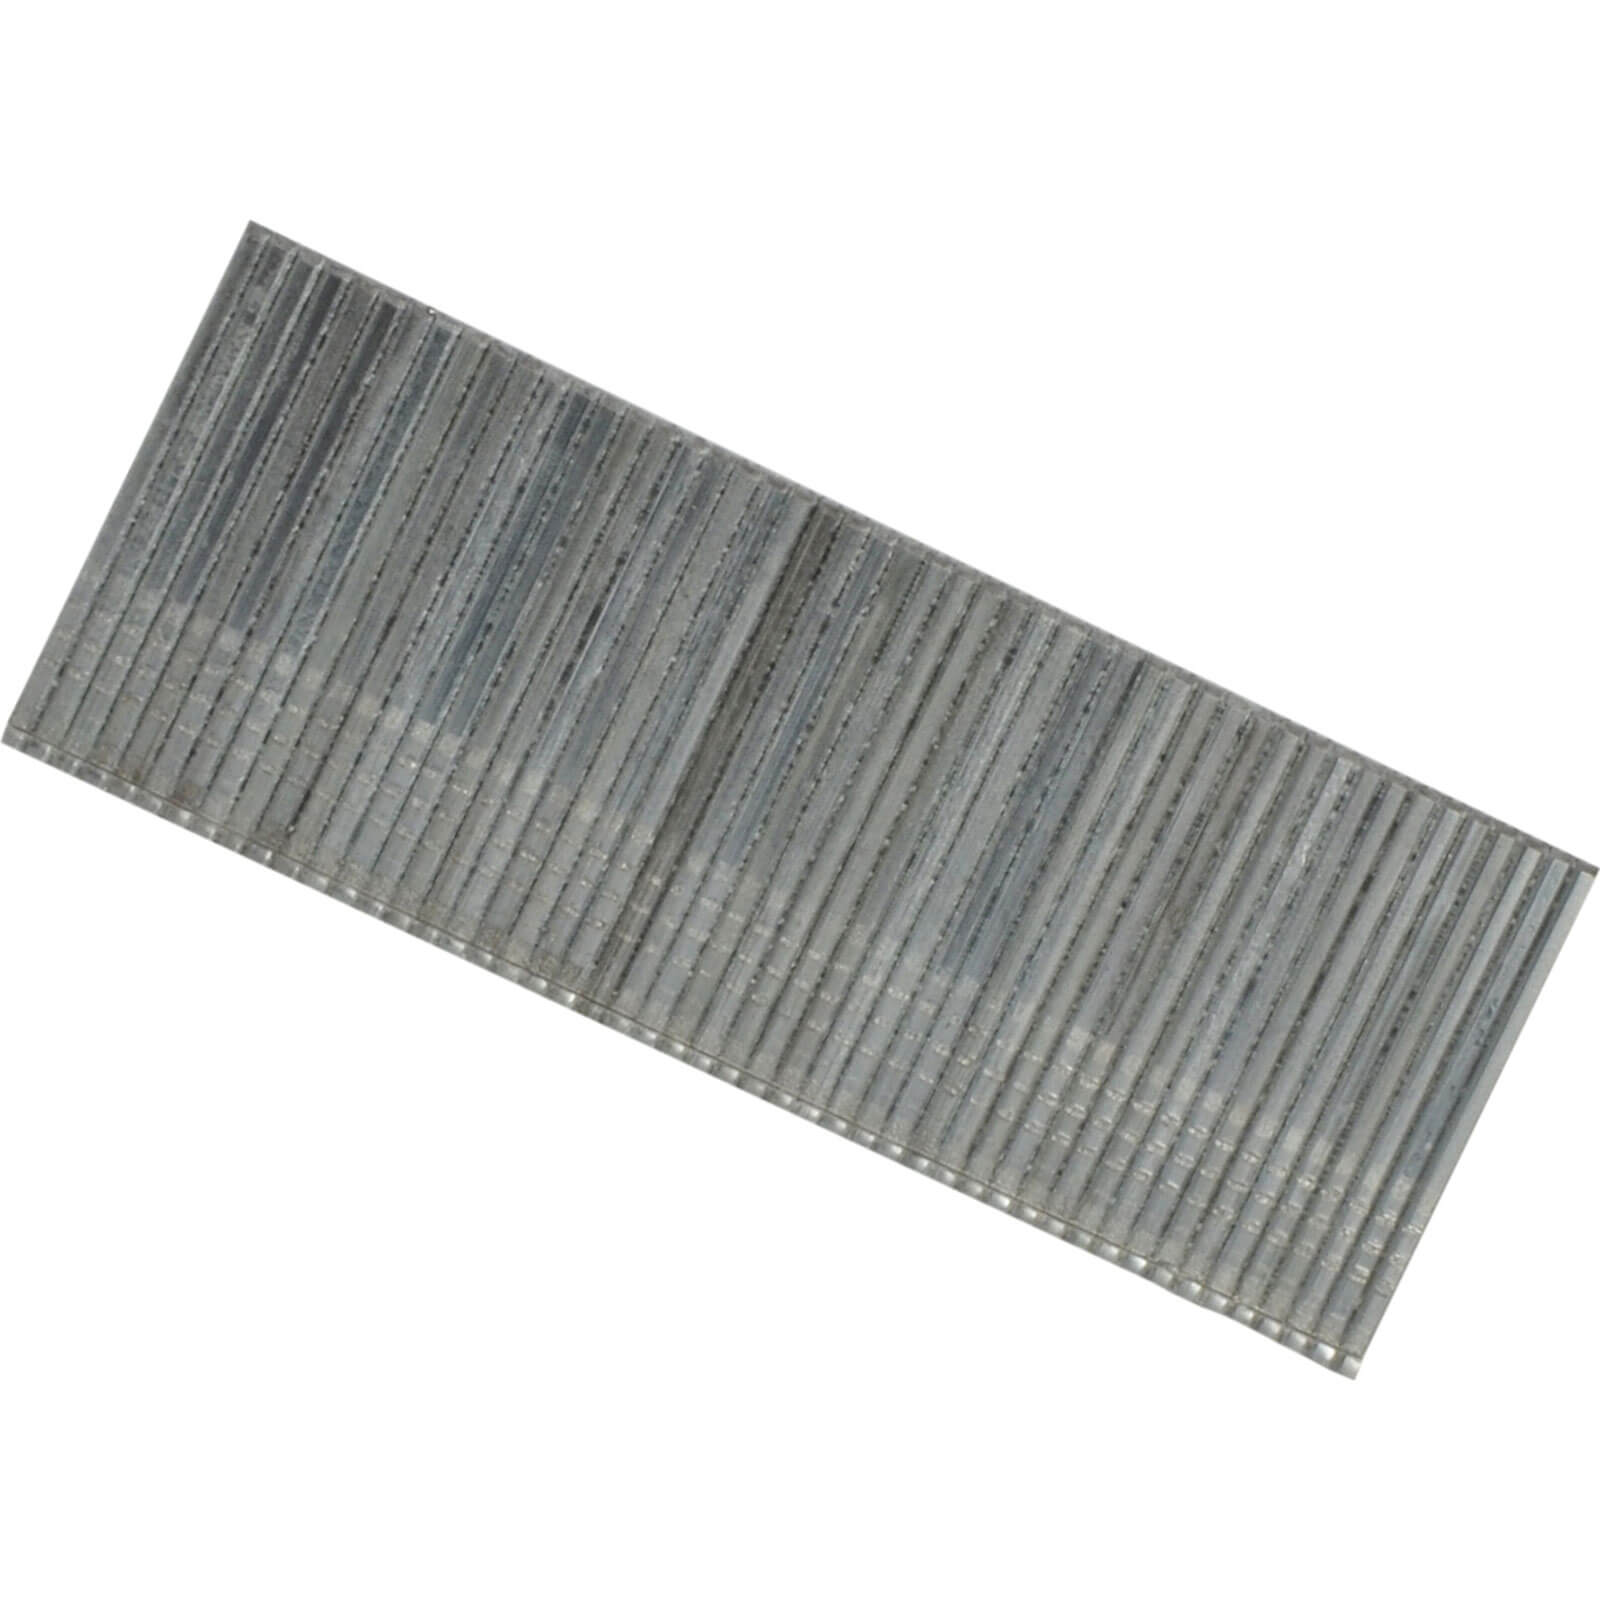 Image of Bostitch 16 Gauge Straight Finish Nails 63mm Pack of 2500